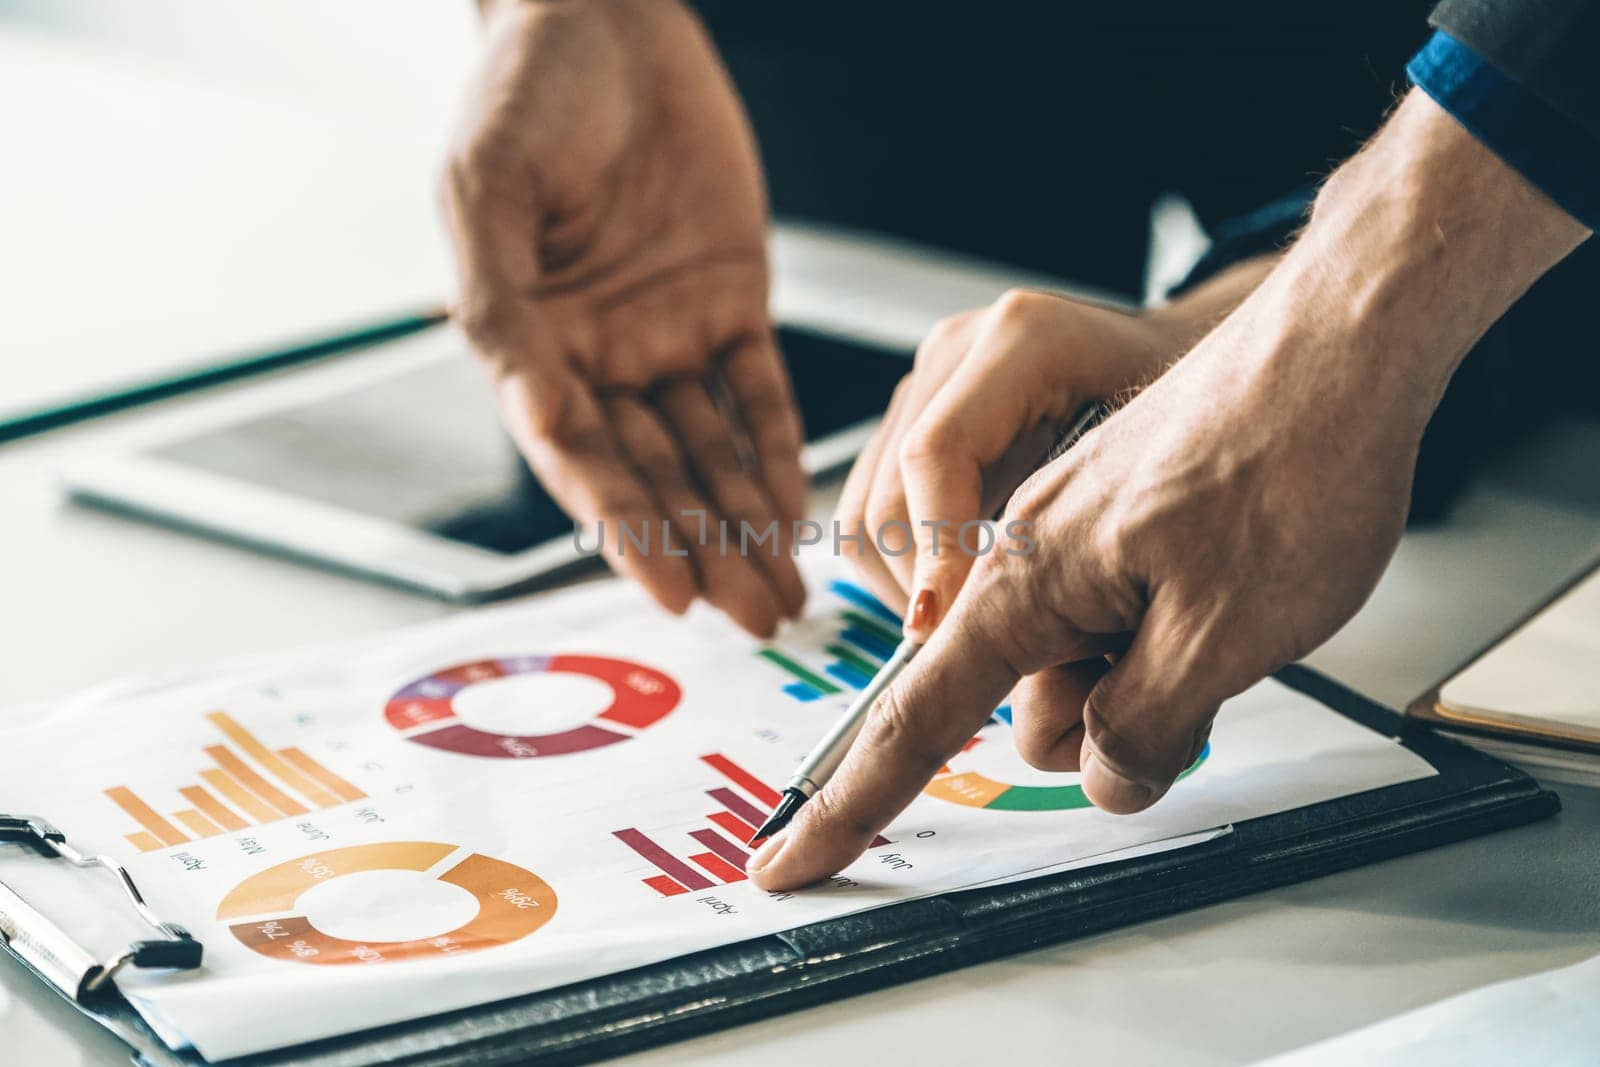 Businessman and businesswoman in meeting working with many financial statement document on desk. Concept of busy business profit analysis and brainstorm. Close up shot at people hands and papers. uds